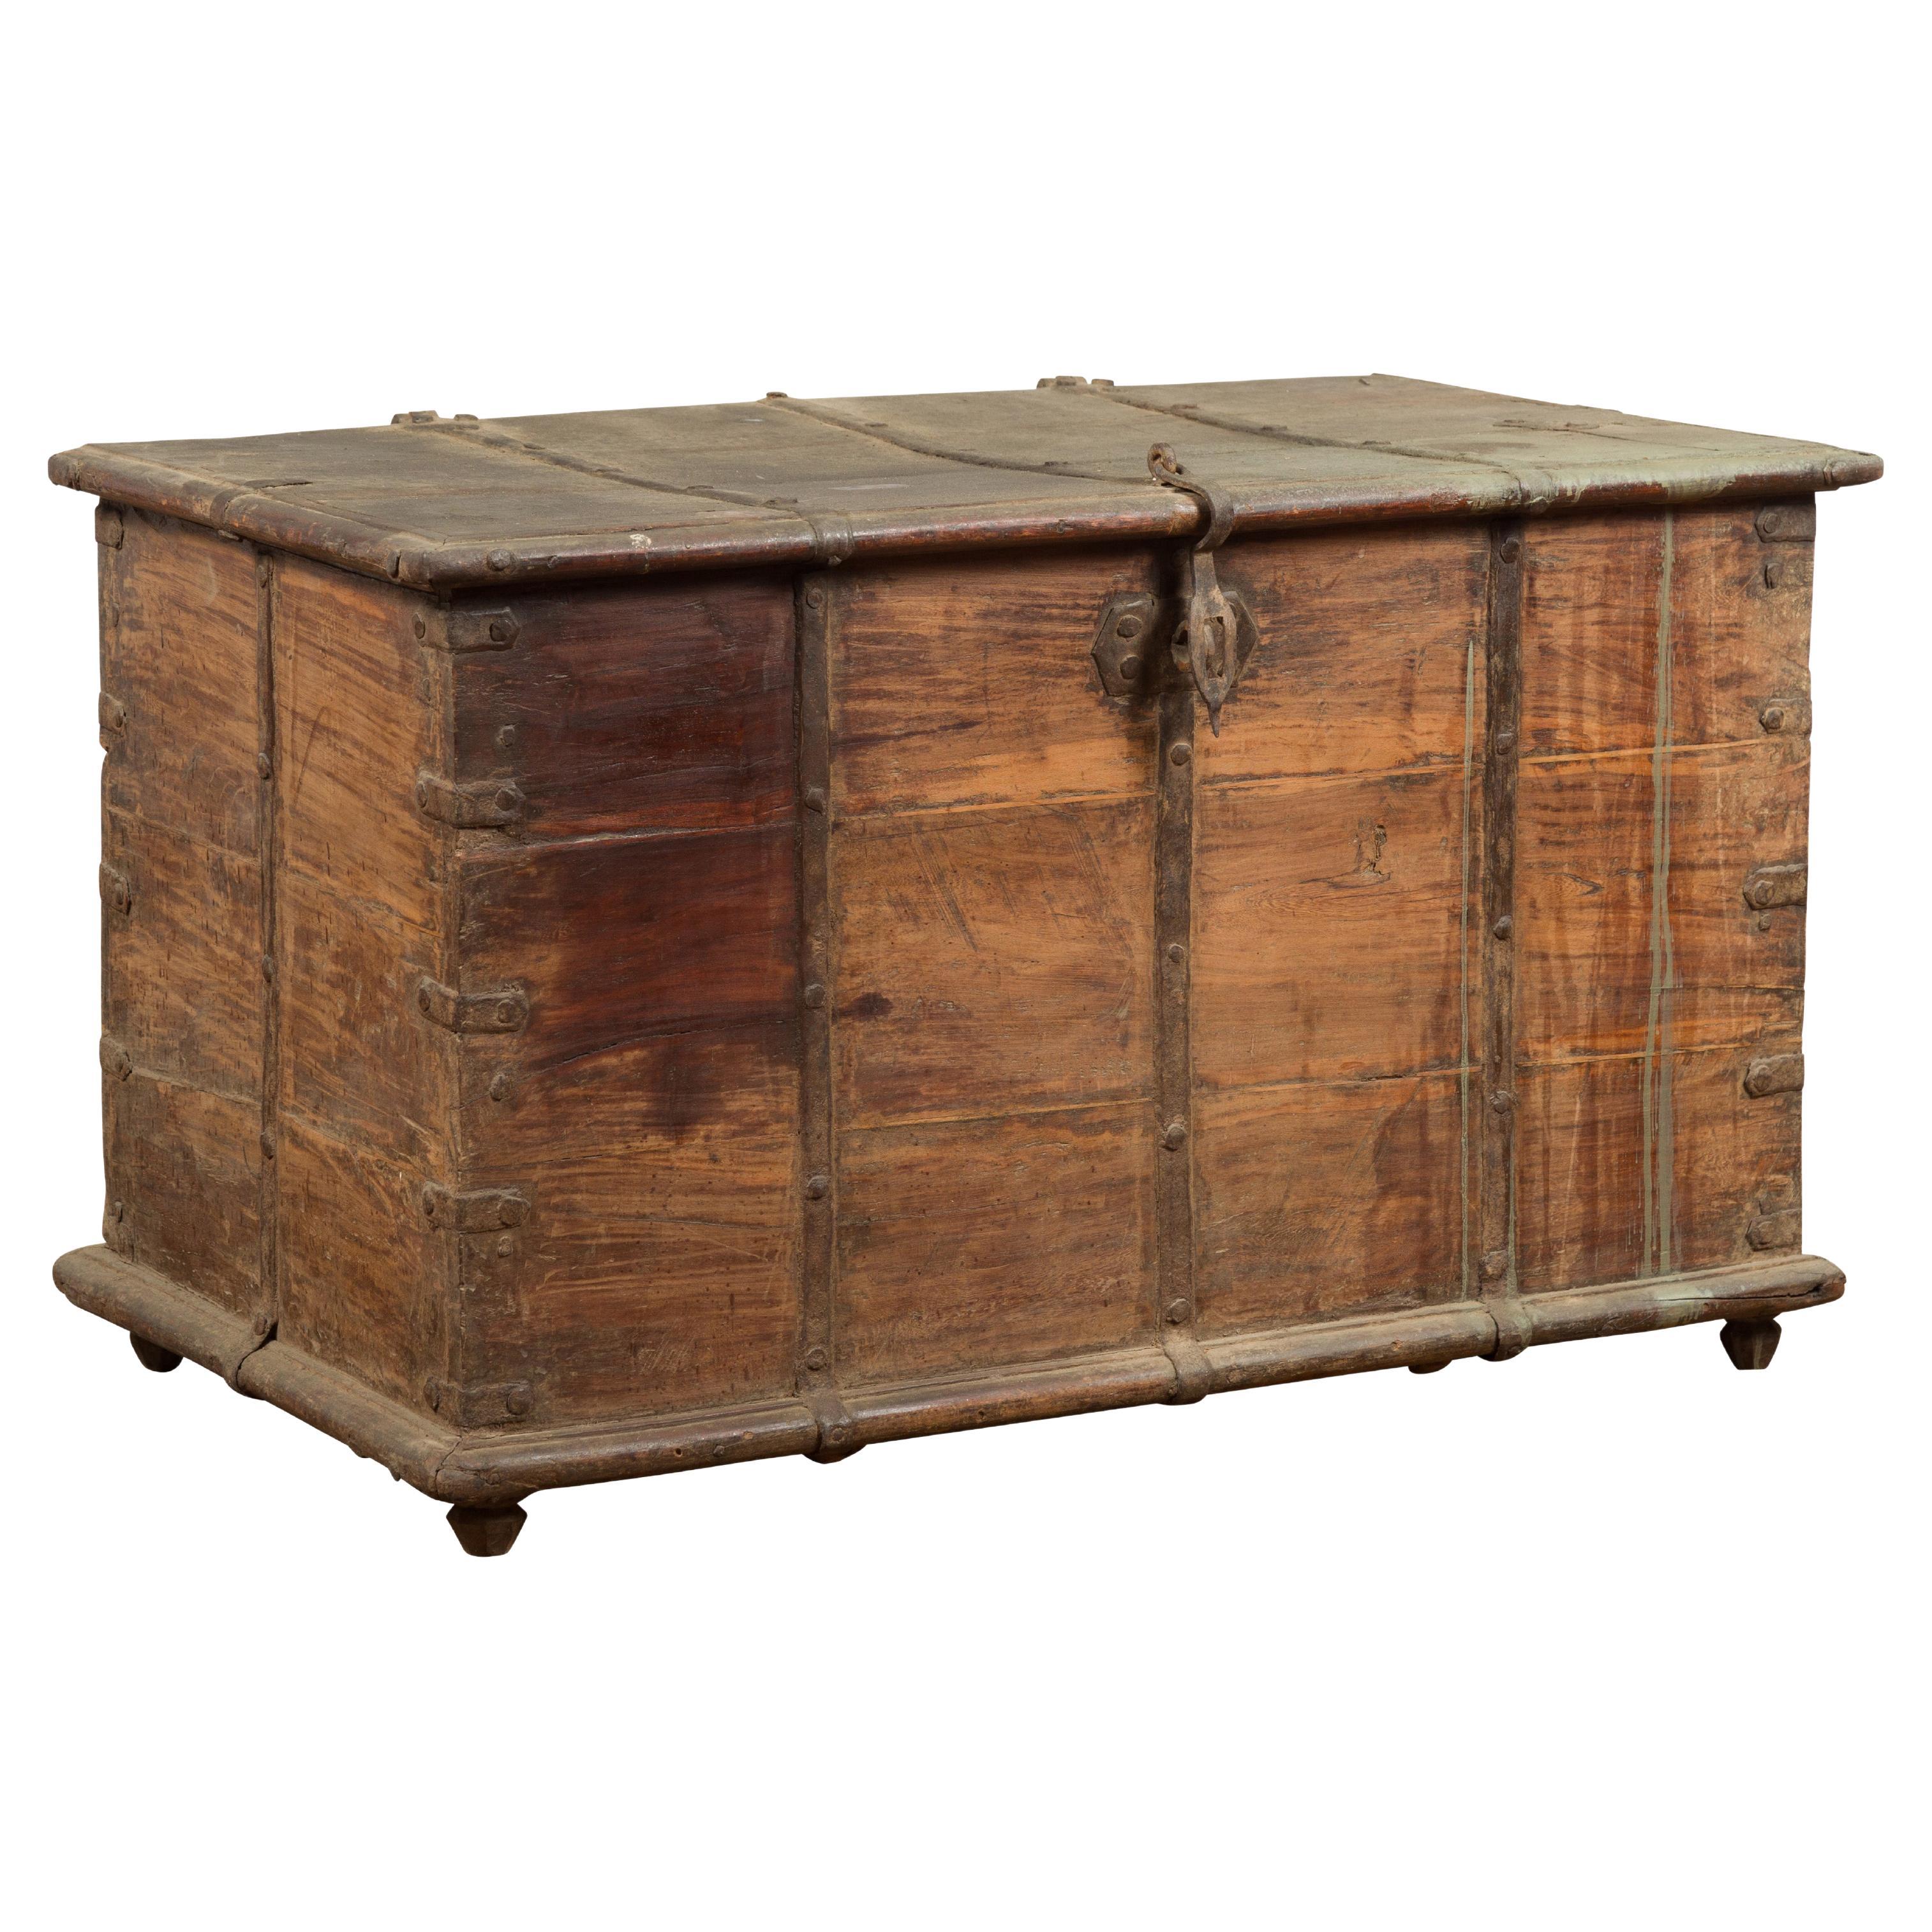 19th Century Blanket Chest with Brass Hardware and Rustic Character For Sale